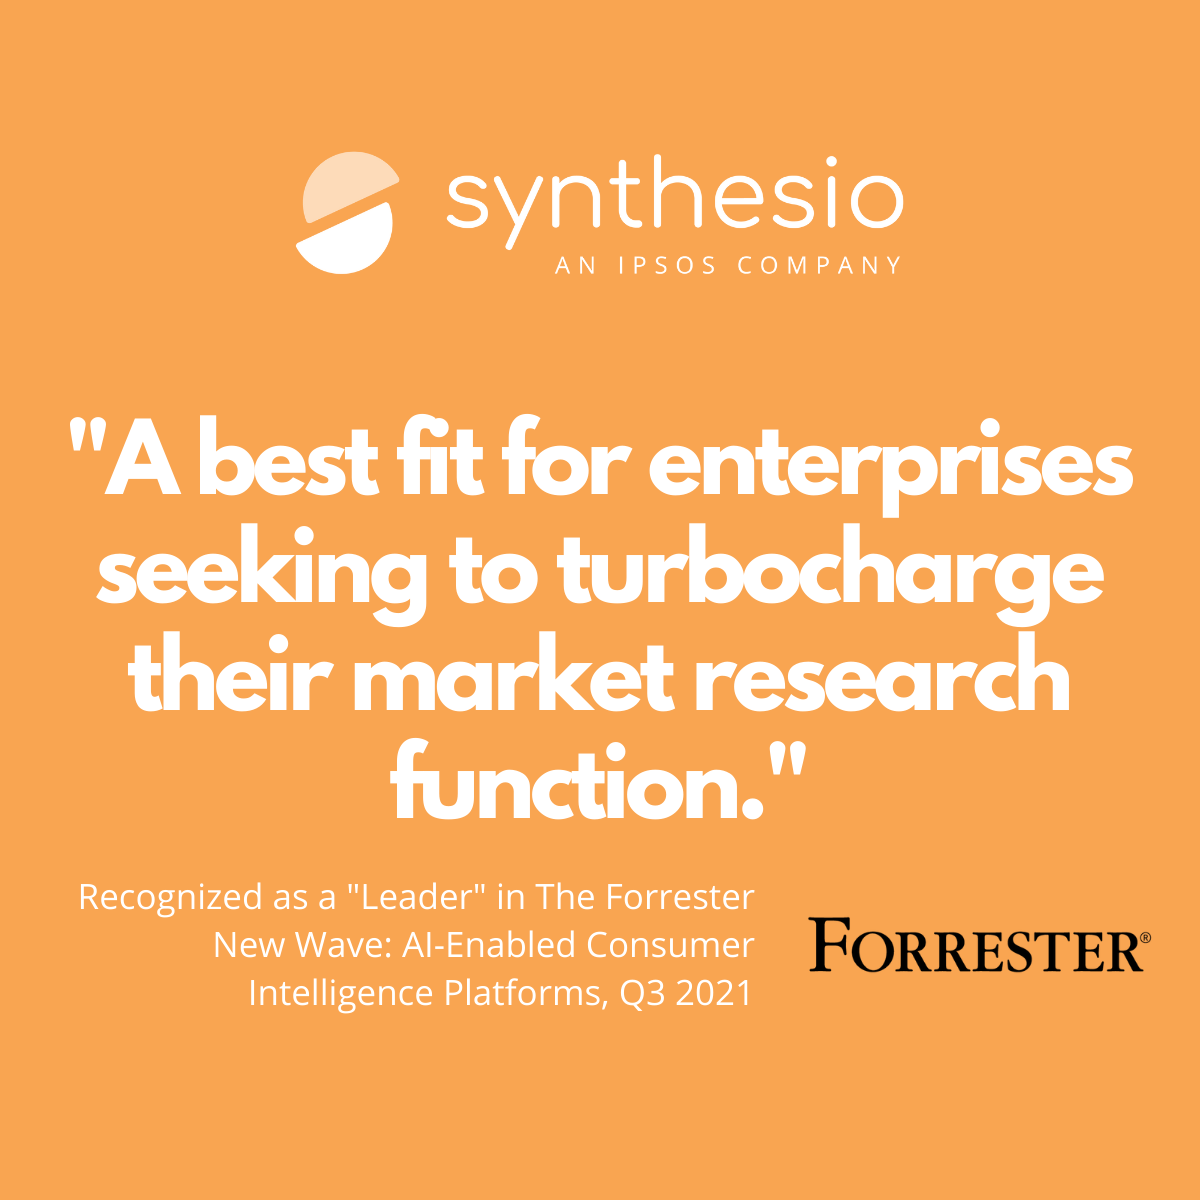 synthesio-leader-orange-image-landing-page.png